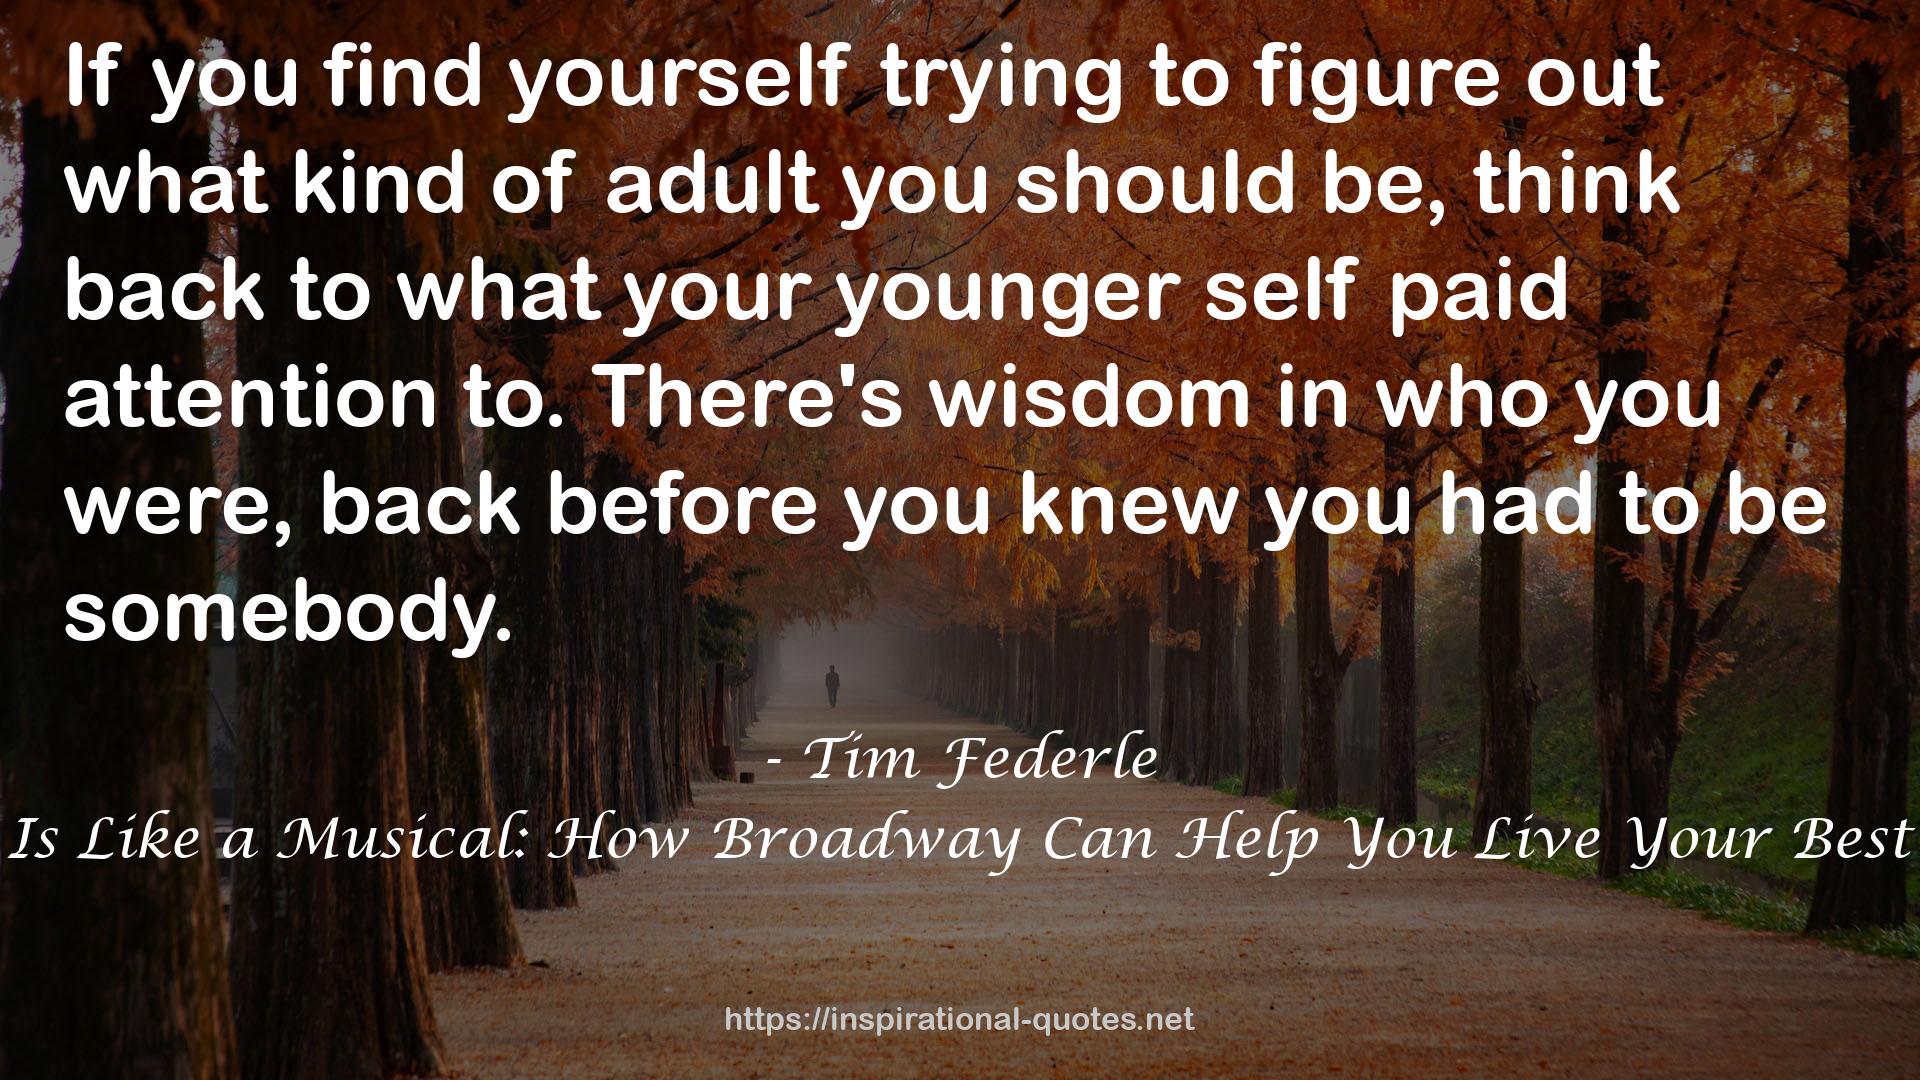 Life Is Like a Musical: How Broadway Can Help You Live Your Best Life QUOTES